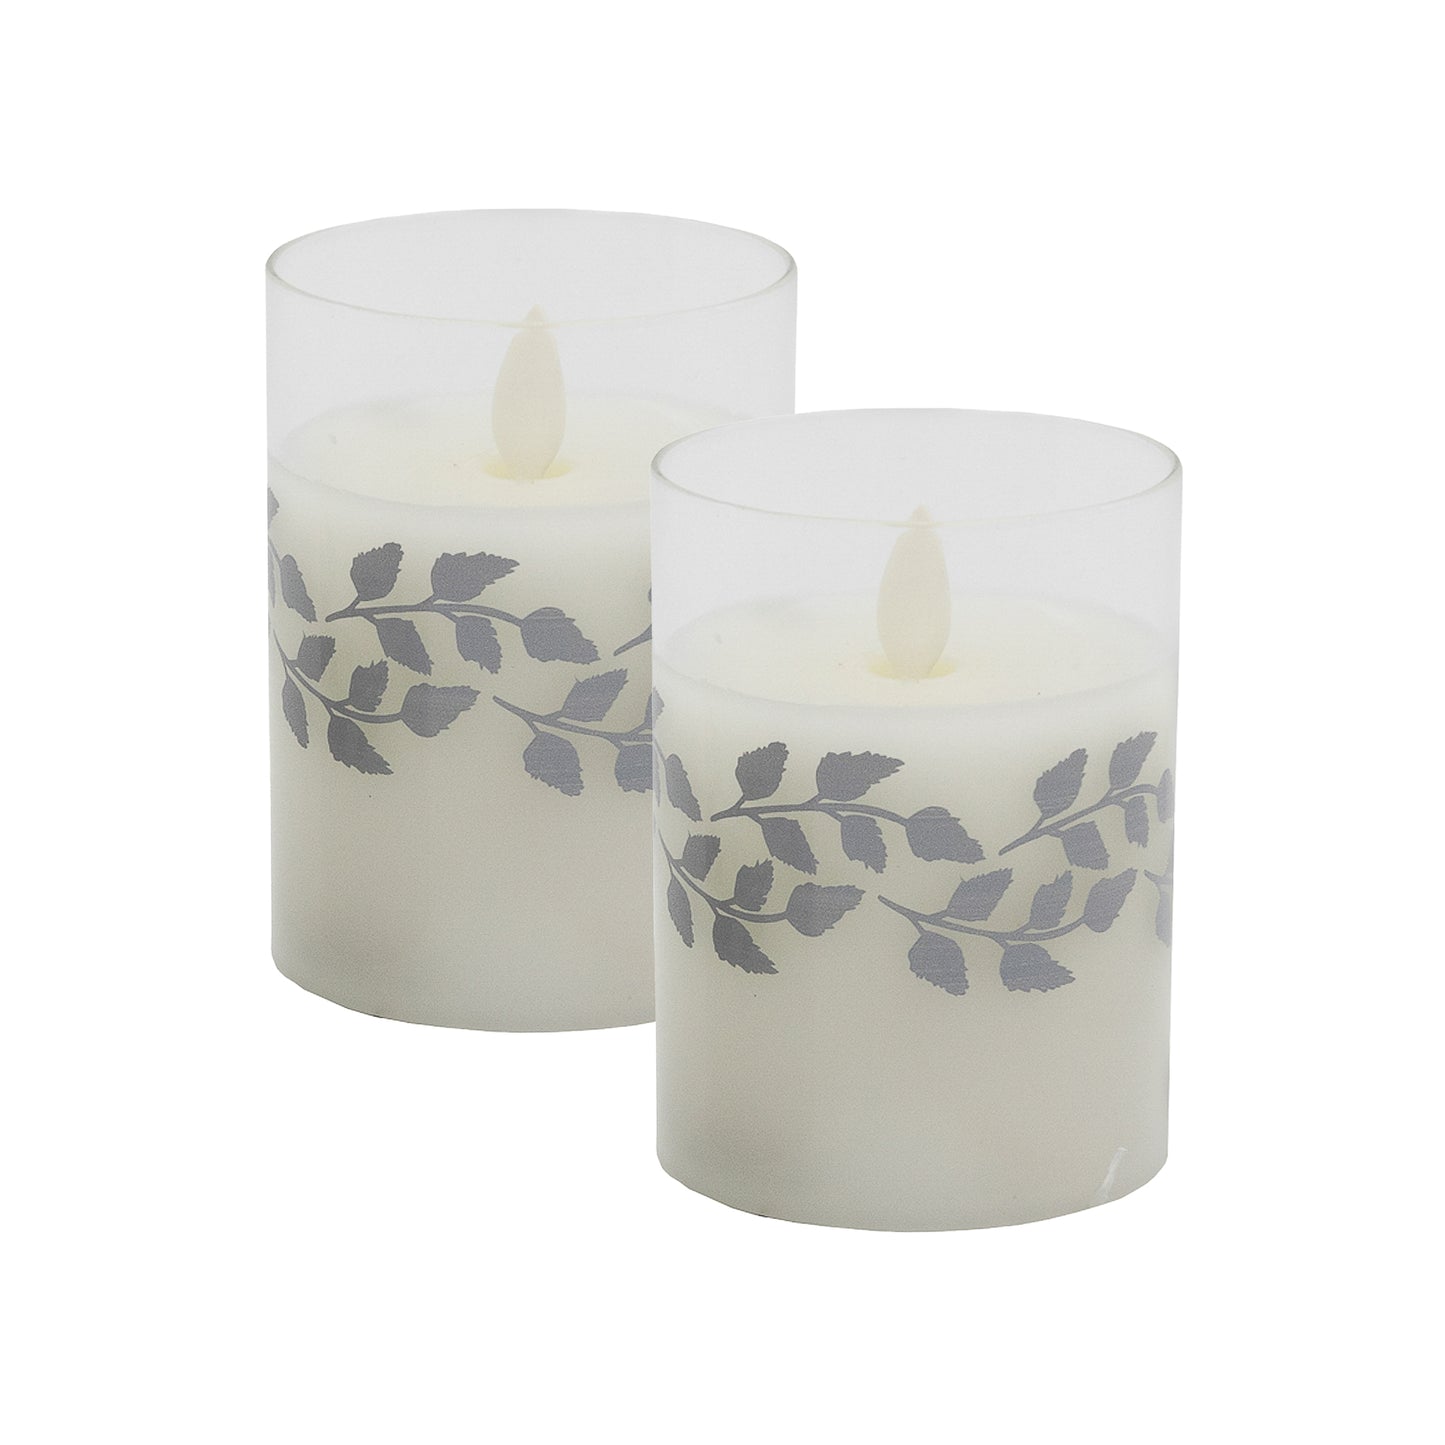 Battery Operated LED Glass Candles with Flickering Flame, Gold Garland - Set of 2 - Silver